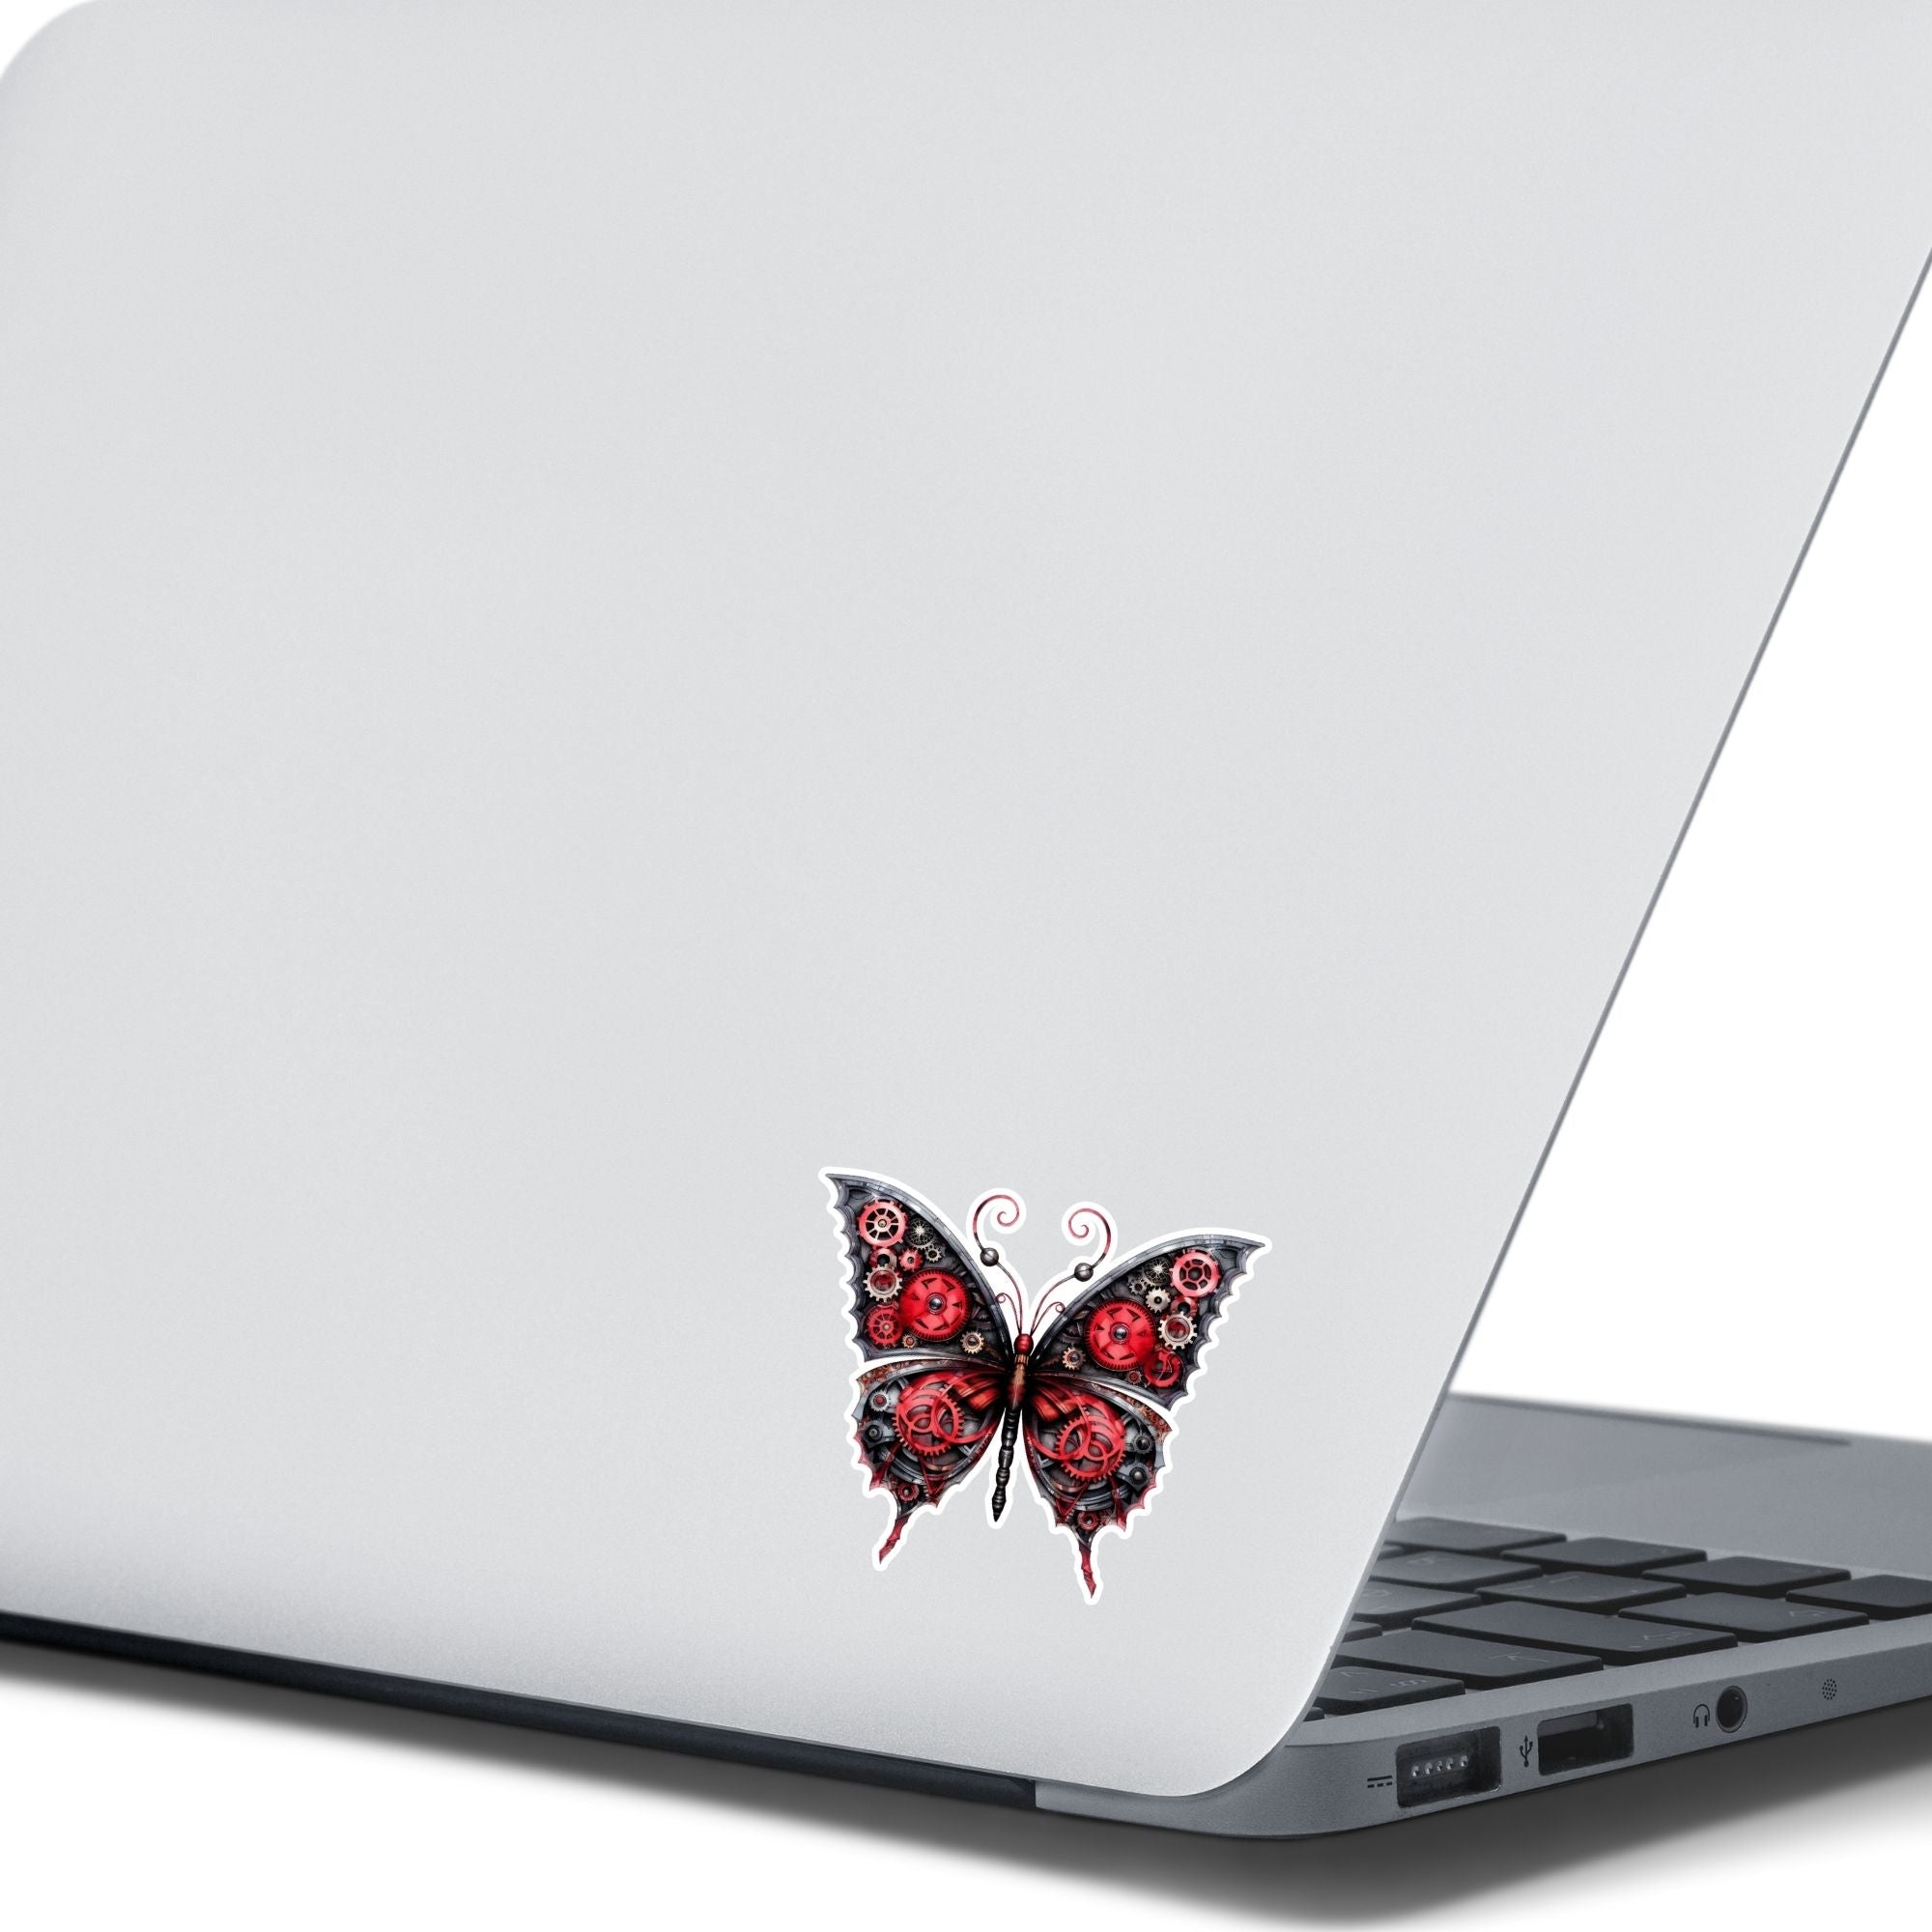 This image shows the Steampunk Butterfly 5 Die-Cut Sticker on the back of an open laptop.